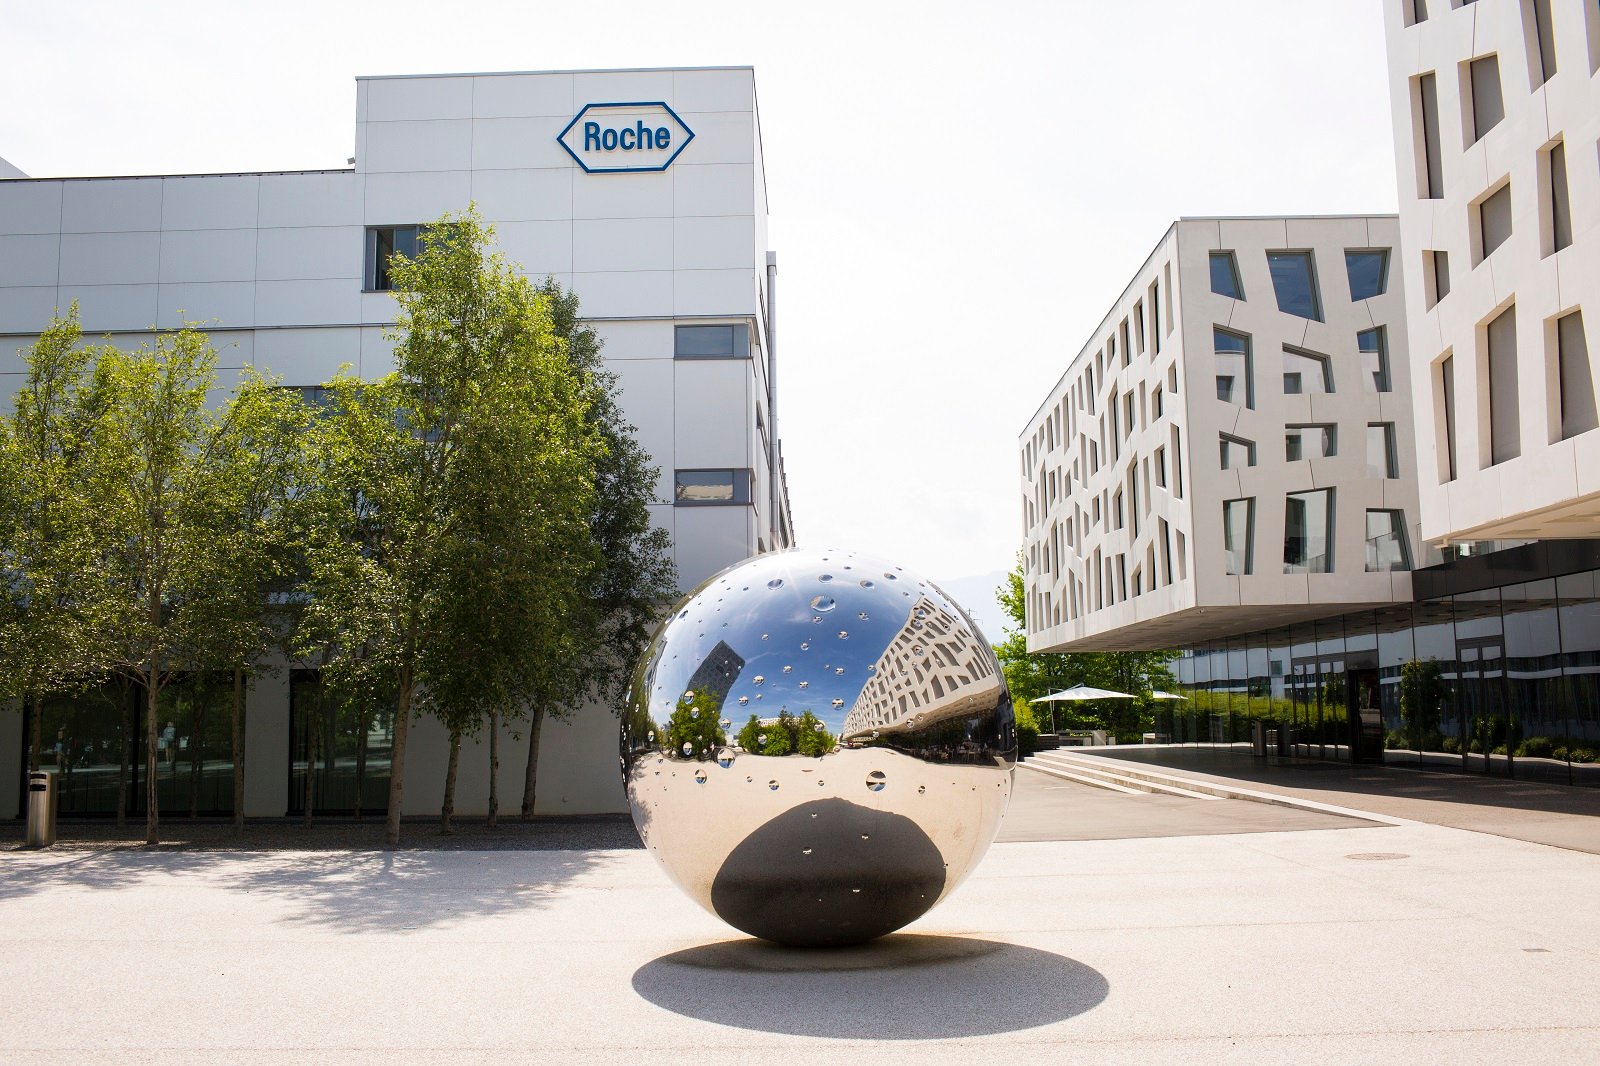 Roche pays $7B to challenge Merck for bowel disease market, intensifying TL1A feeding frenzy